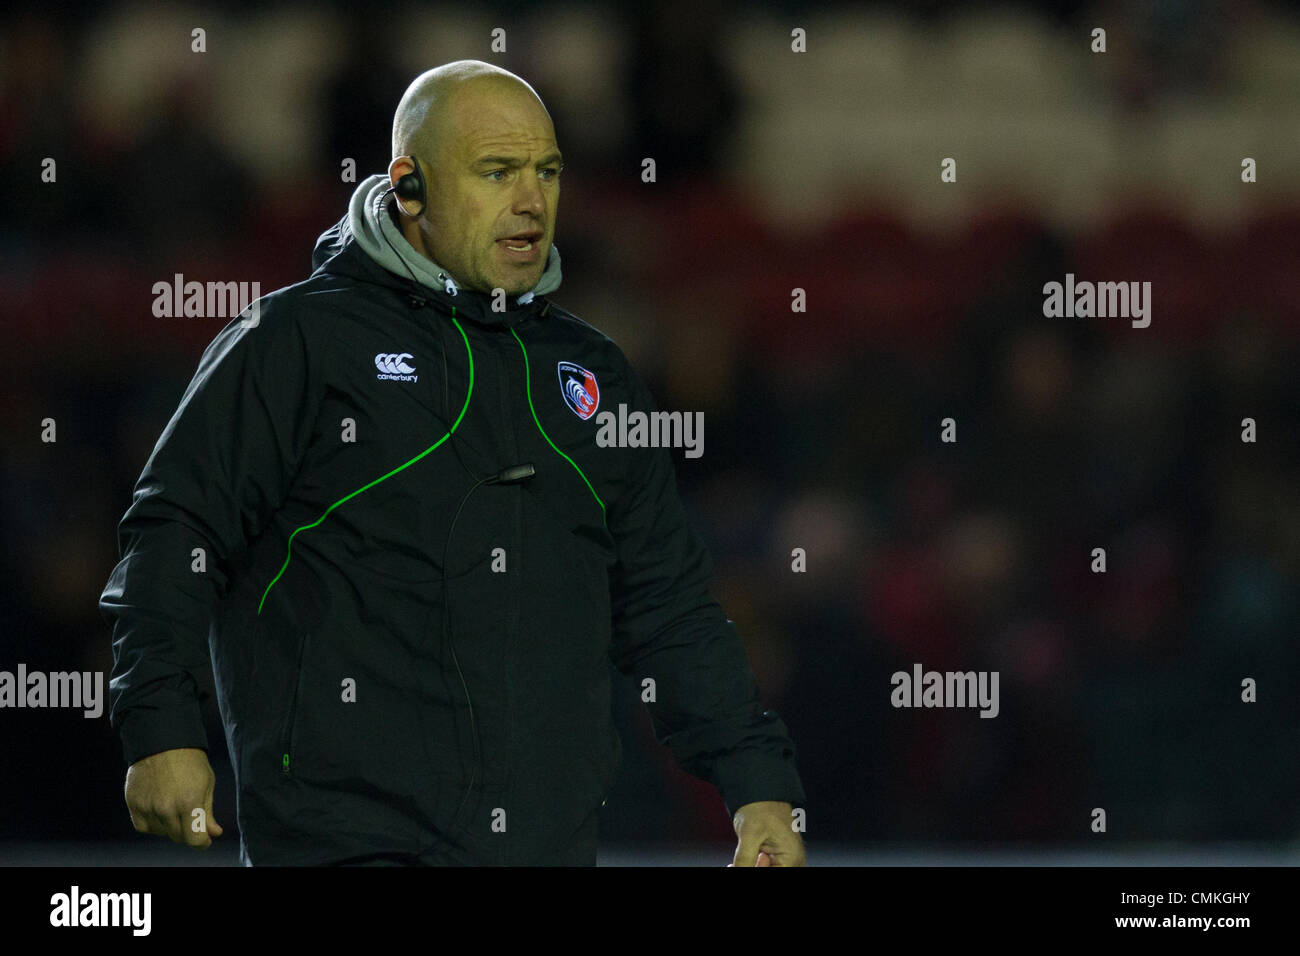 Leicester, UK. 2nd November 2013. Leicester Tigers Director of Rugby Richard Cockerill before the Aviva Premiership match between Leicester Tigers and Harlequins played at Welford Road, Leicester on Saturday 2 November 2013. Credit: Graham Wilson / Pipeline Images/ Alamy Live News Stock Photo